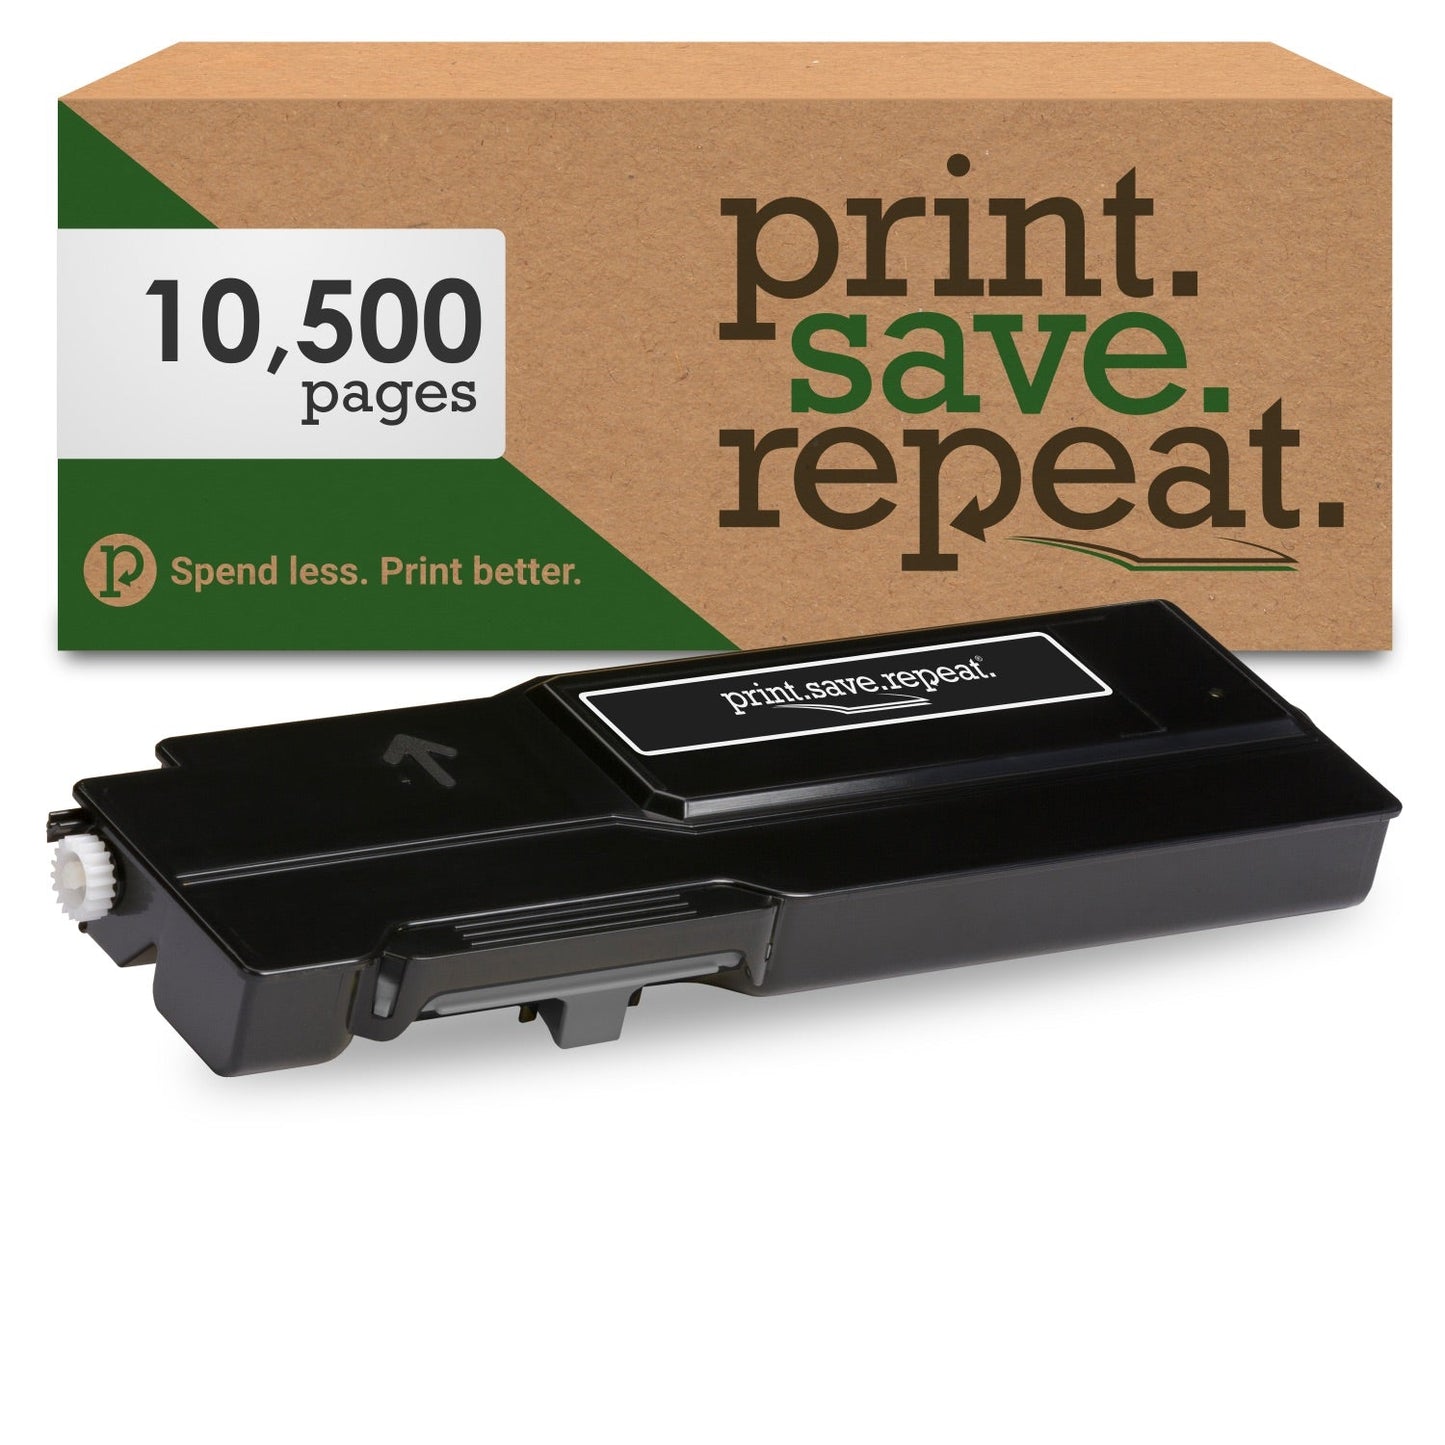 Print.Save.Repeat. Xerox 106R03524 Black Extra High Yield Remanufactured Toner Cartridge for VersaLink C400, C405 [10,500 Pages]